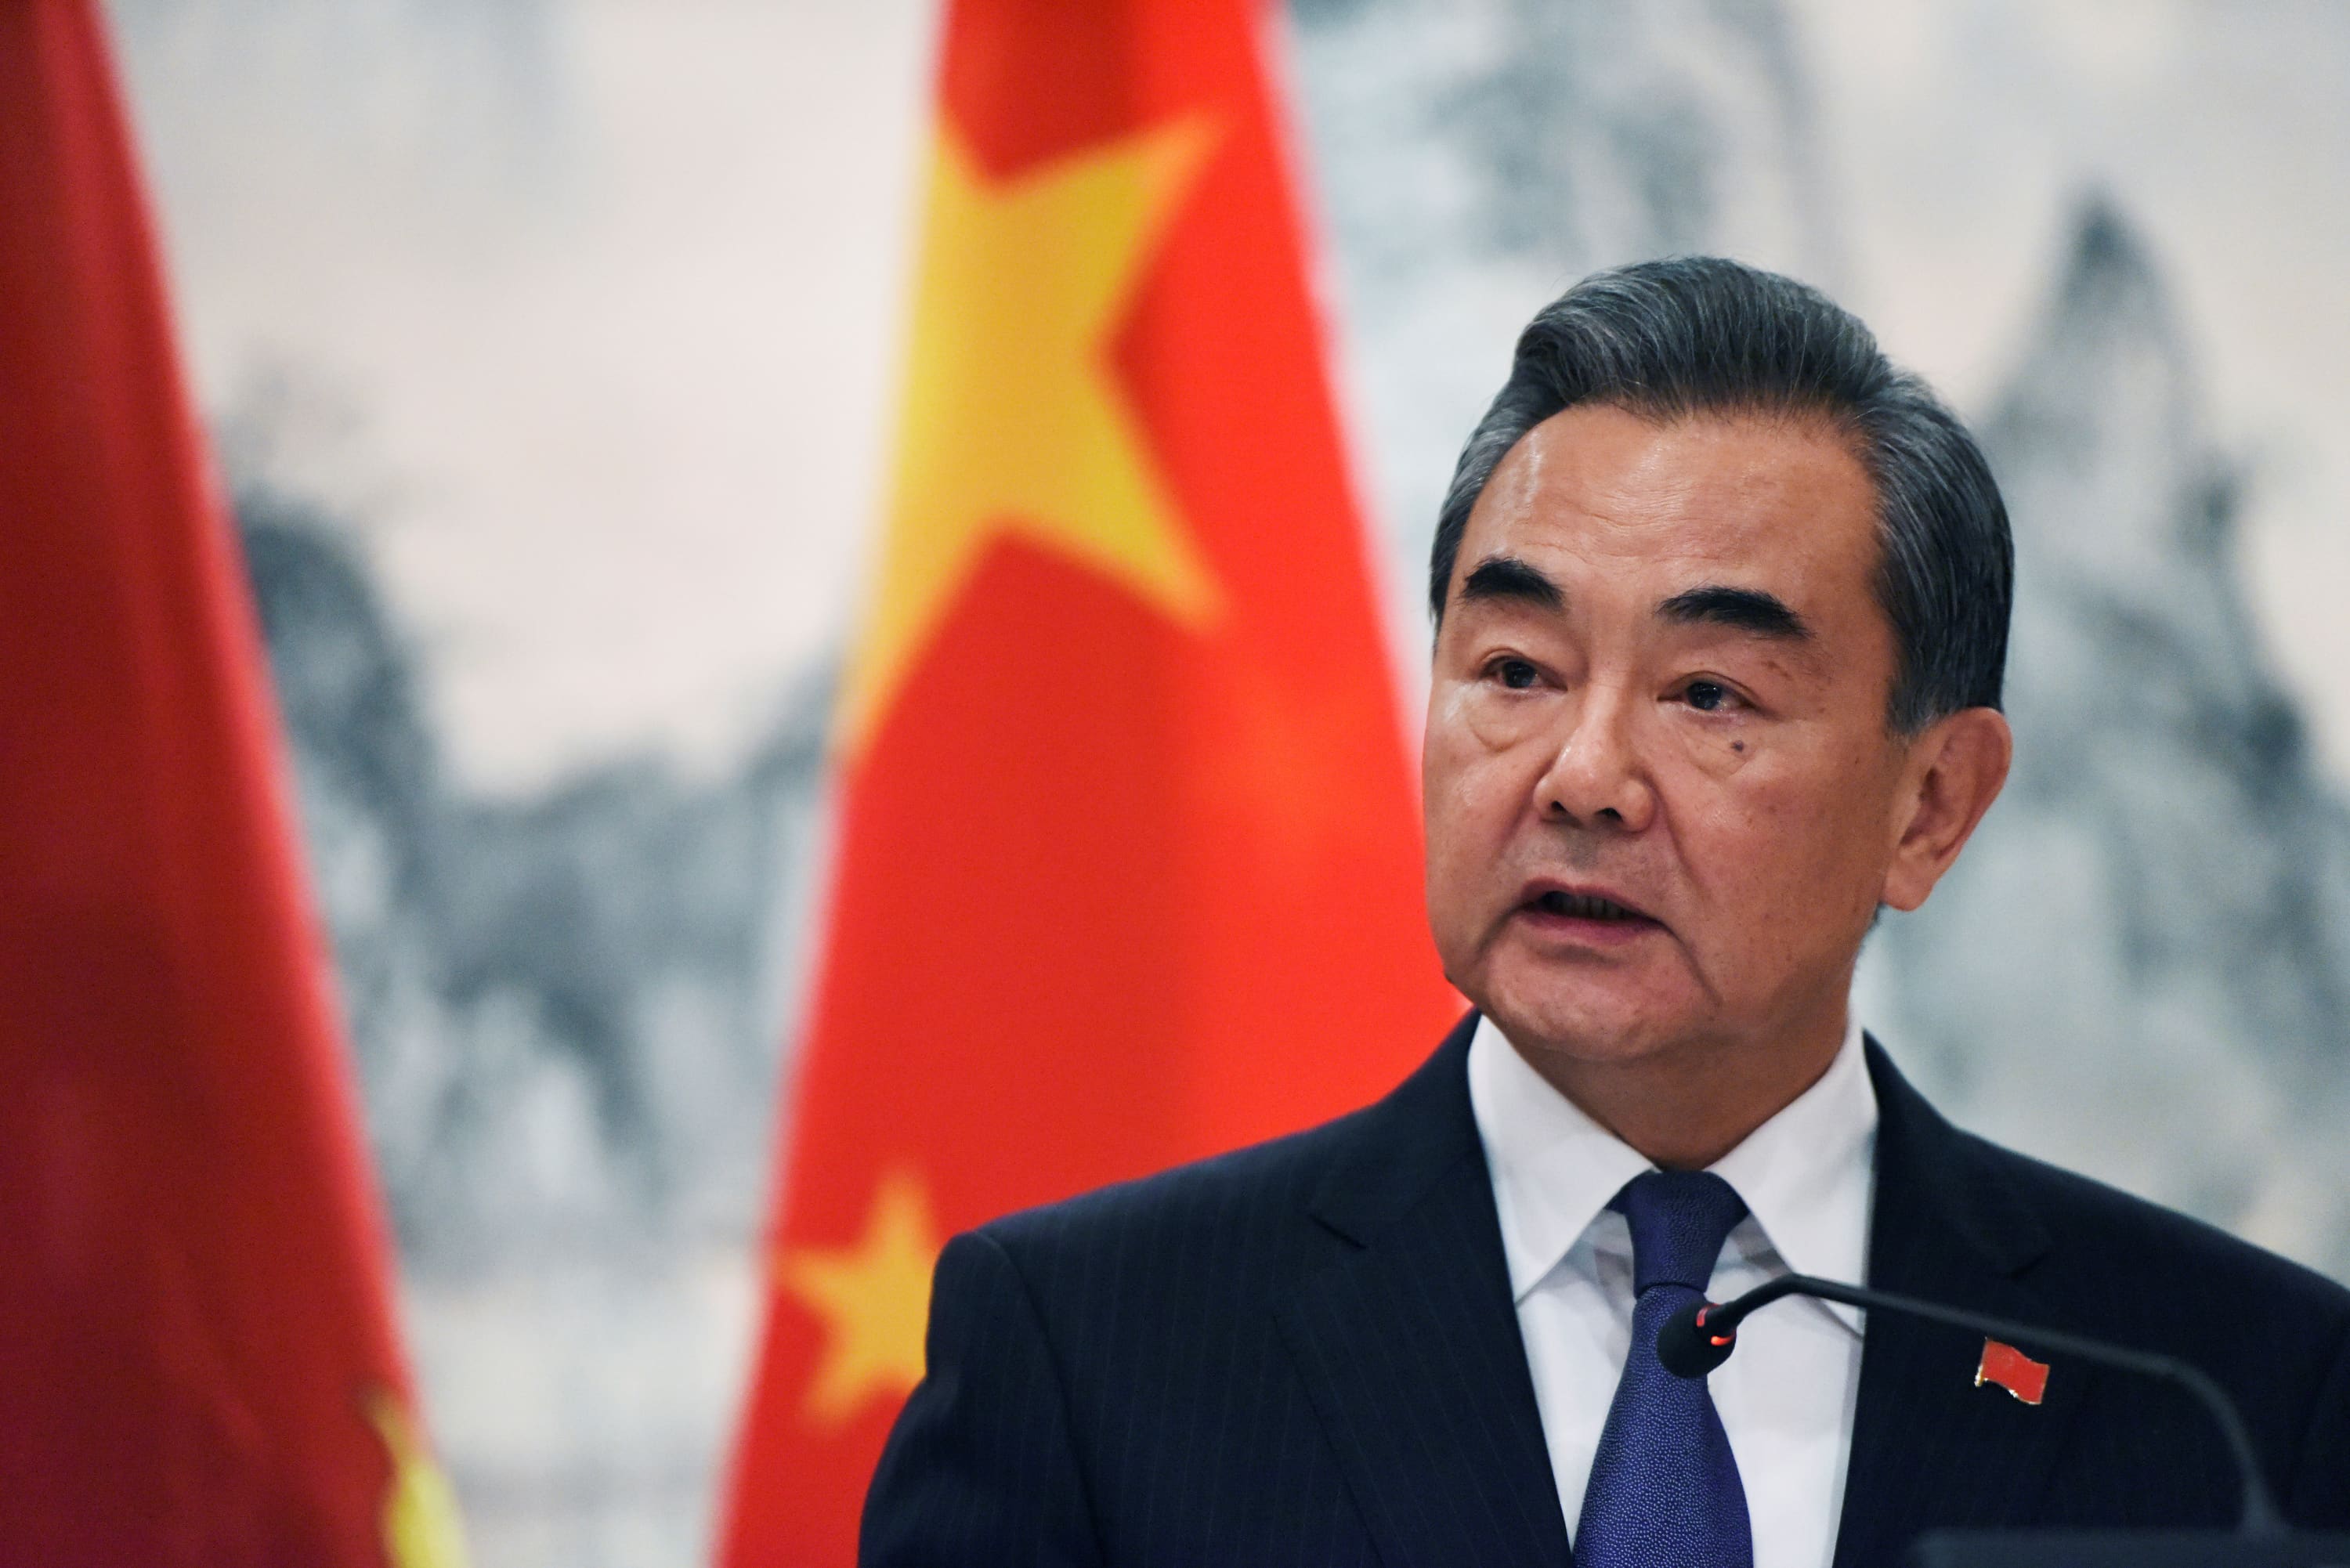 China’s Foreign Minister calls on the US to lift tariff sanctions